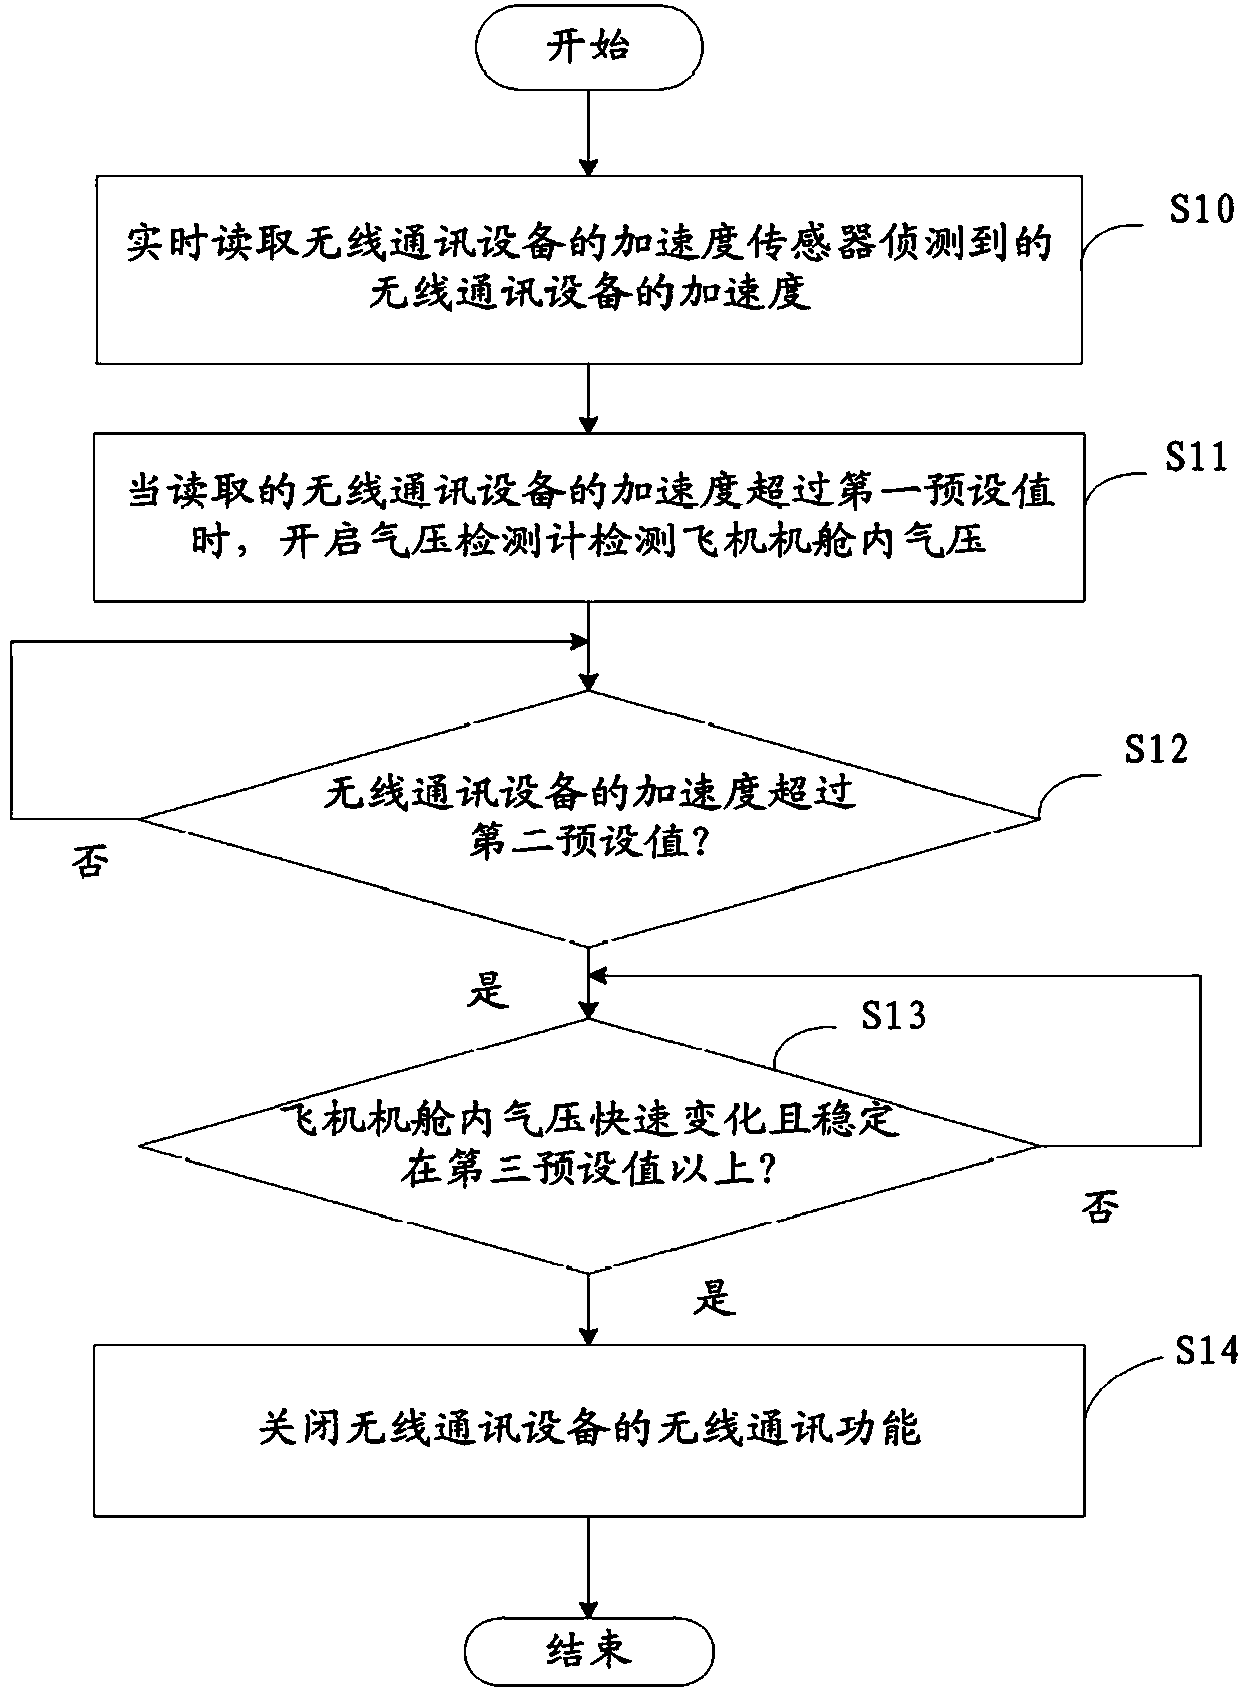 Method and system for managing wireless communication device under flight condition